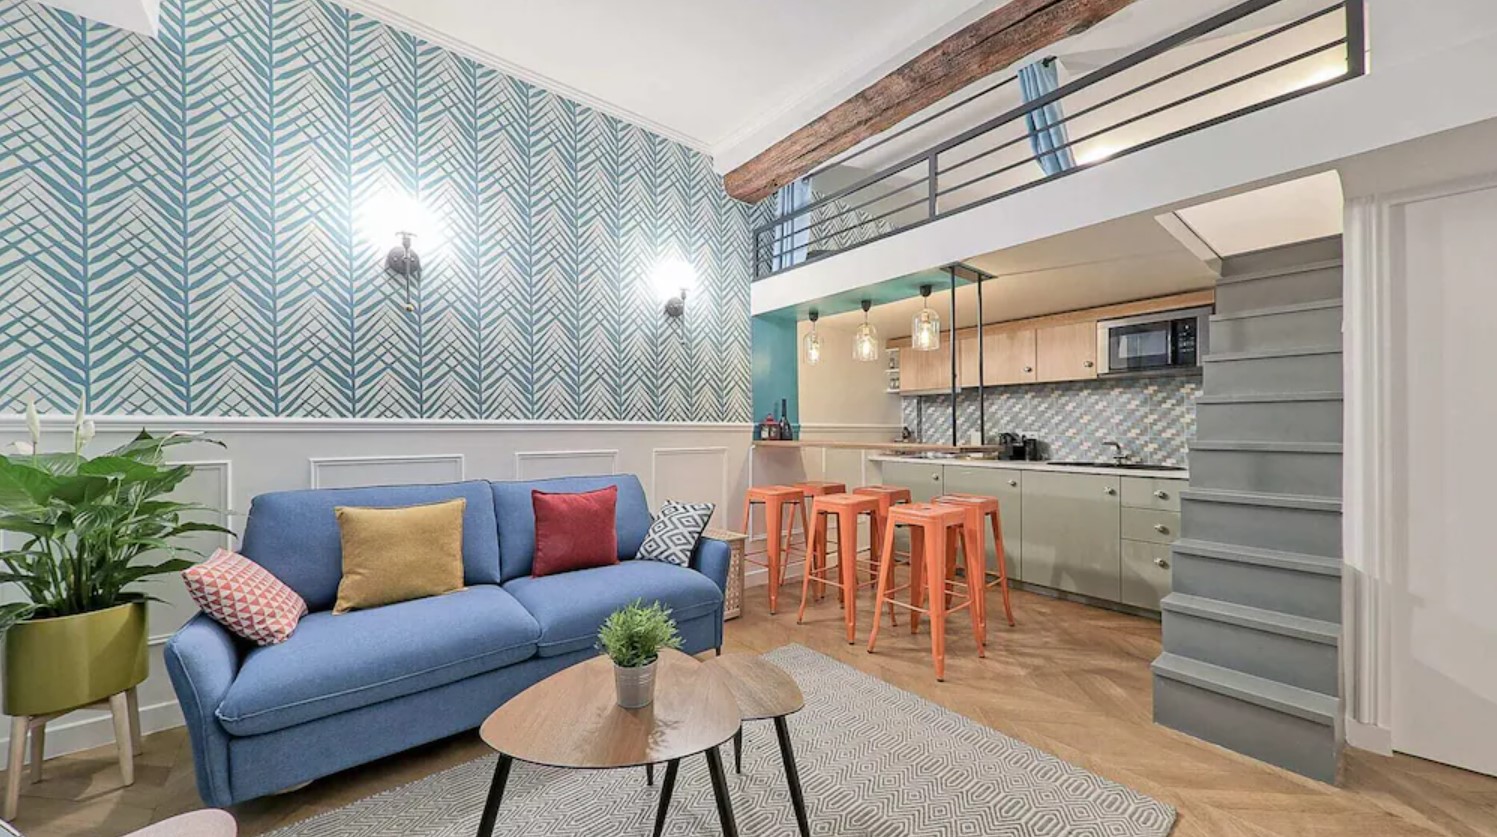 The inside of a colorful loft apartment in paris. It has blue and white wallpaper, a blue couch, peach bar stools, and a small kitchen.